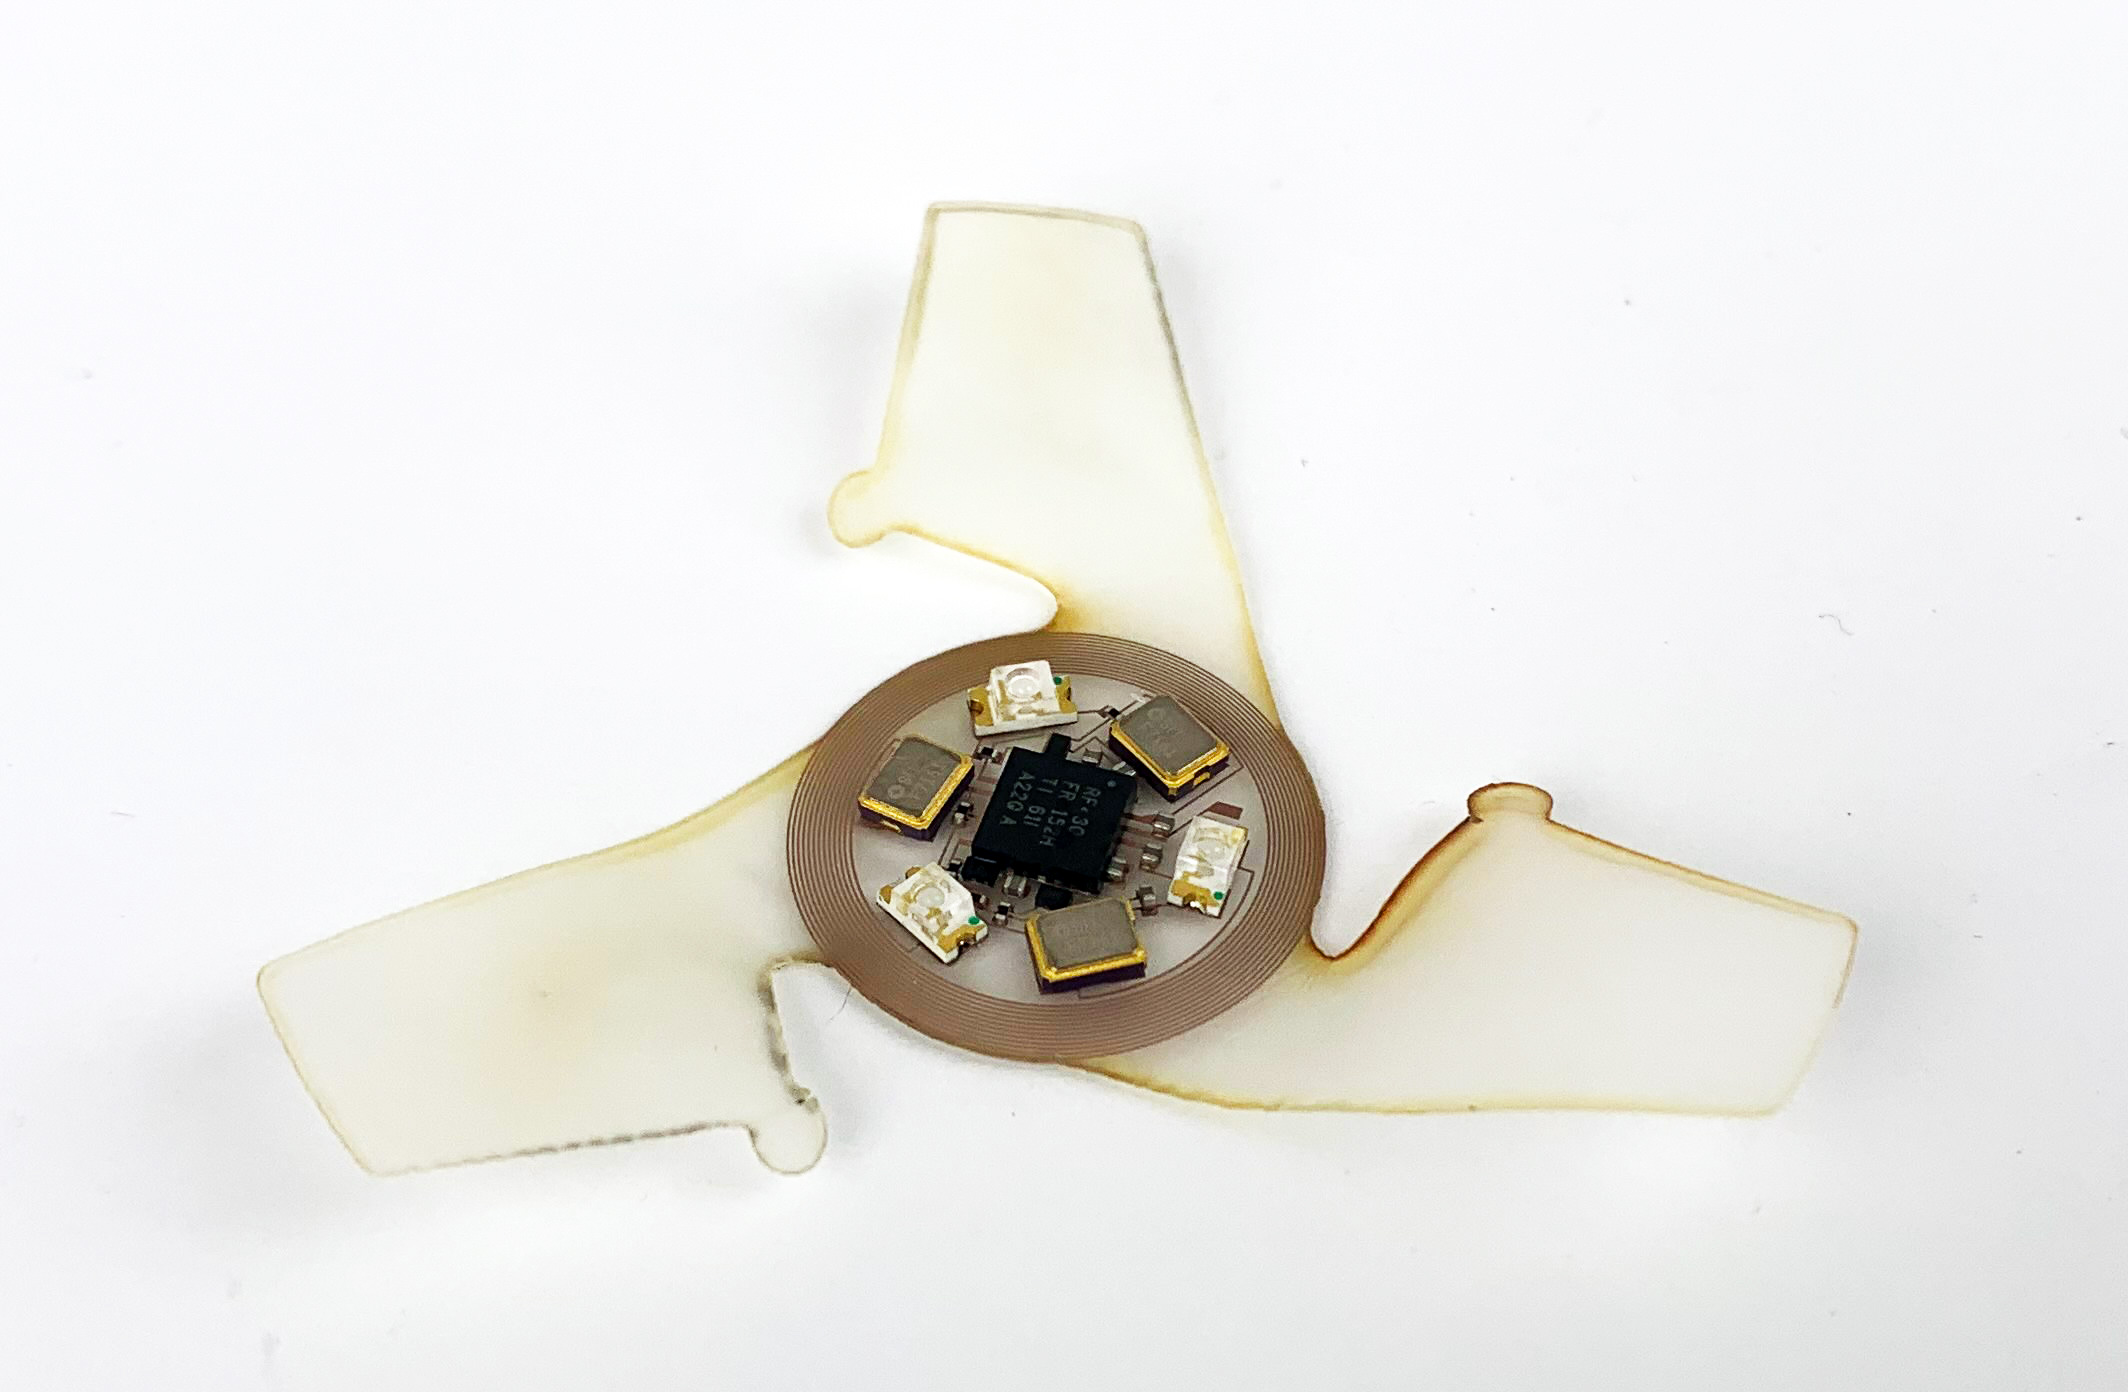 This is the top of a microflier with coil antenna and sensors to detect ultraviolet rays.